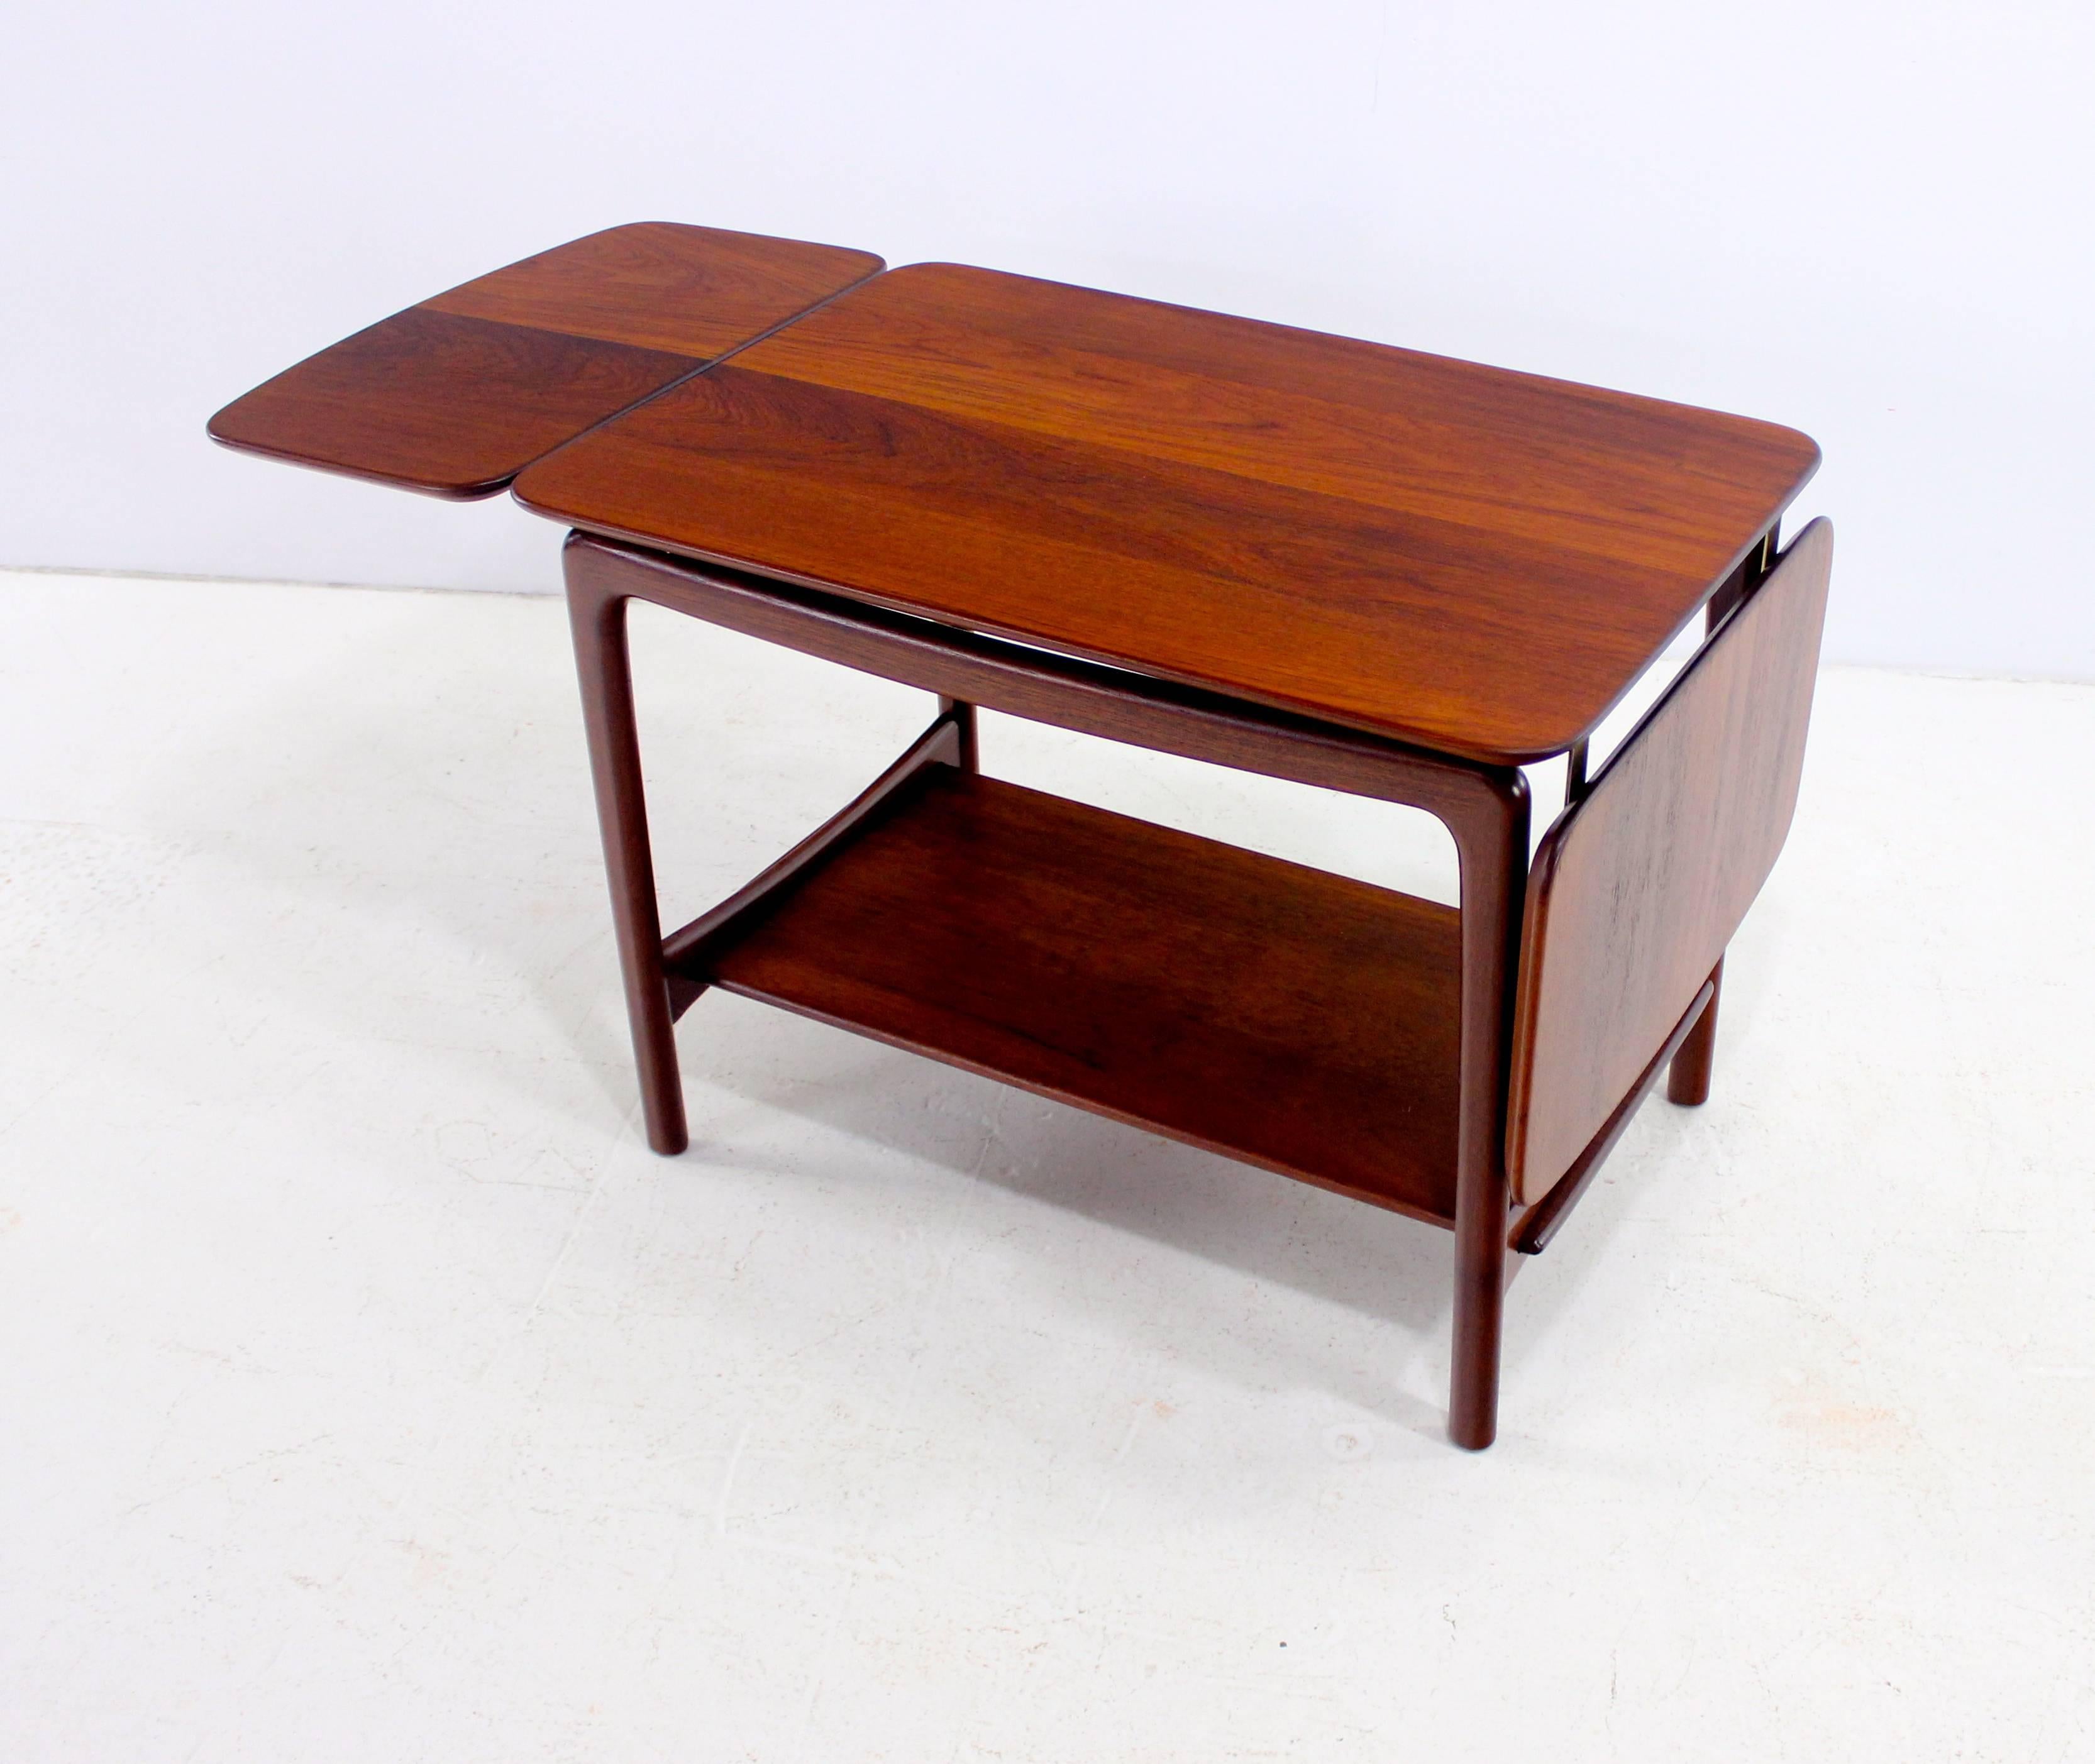 Danish modern side table designed by Peter Hvidt and Orla Mølgaard-Nielsen.
France & Son, maker.
Solid teak with brass accents.
Drop-leaves on each end provide full extension of 20.75"
Lower magazine shelf.
Matching drop-leaf coffee